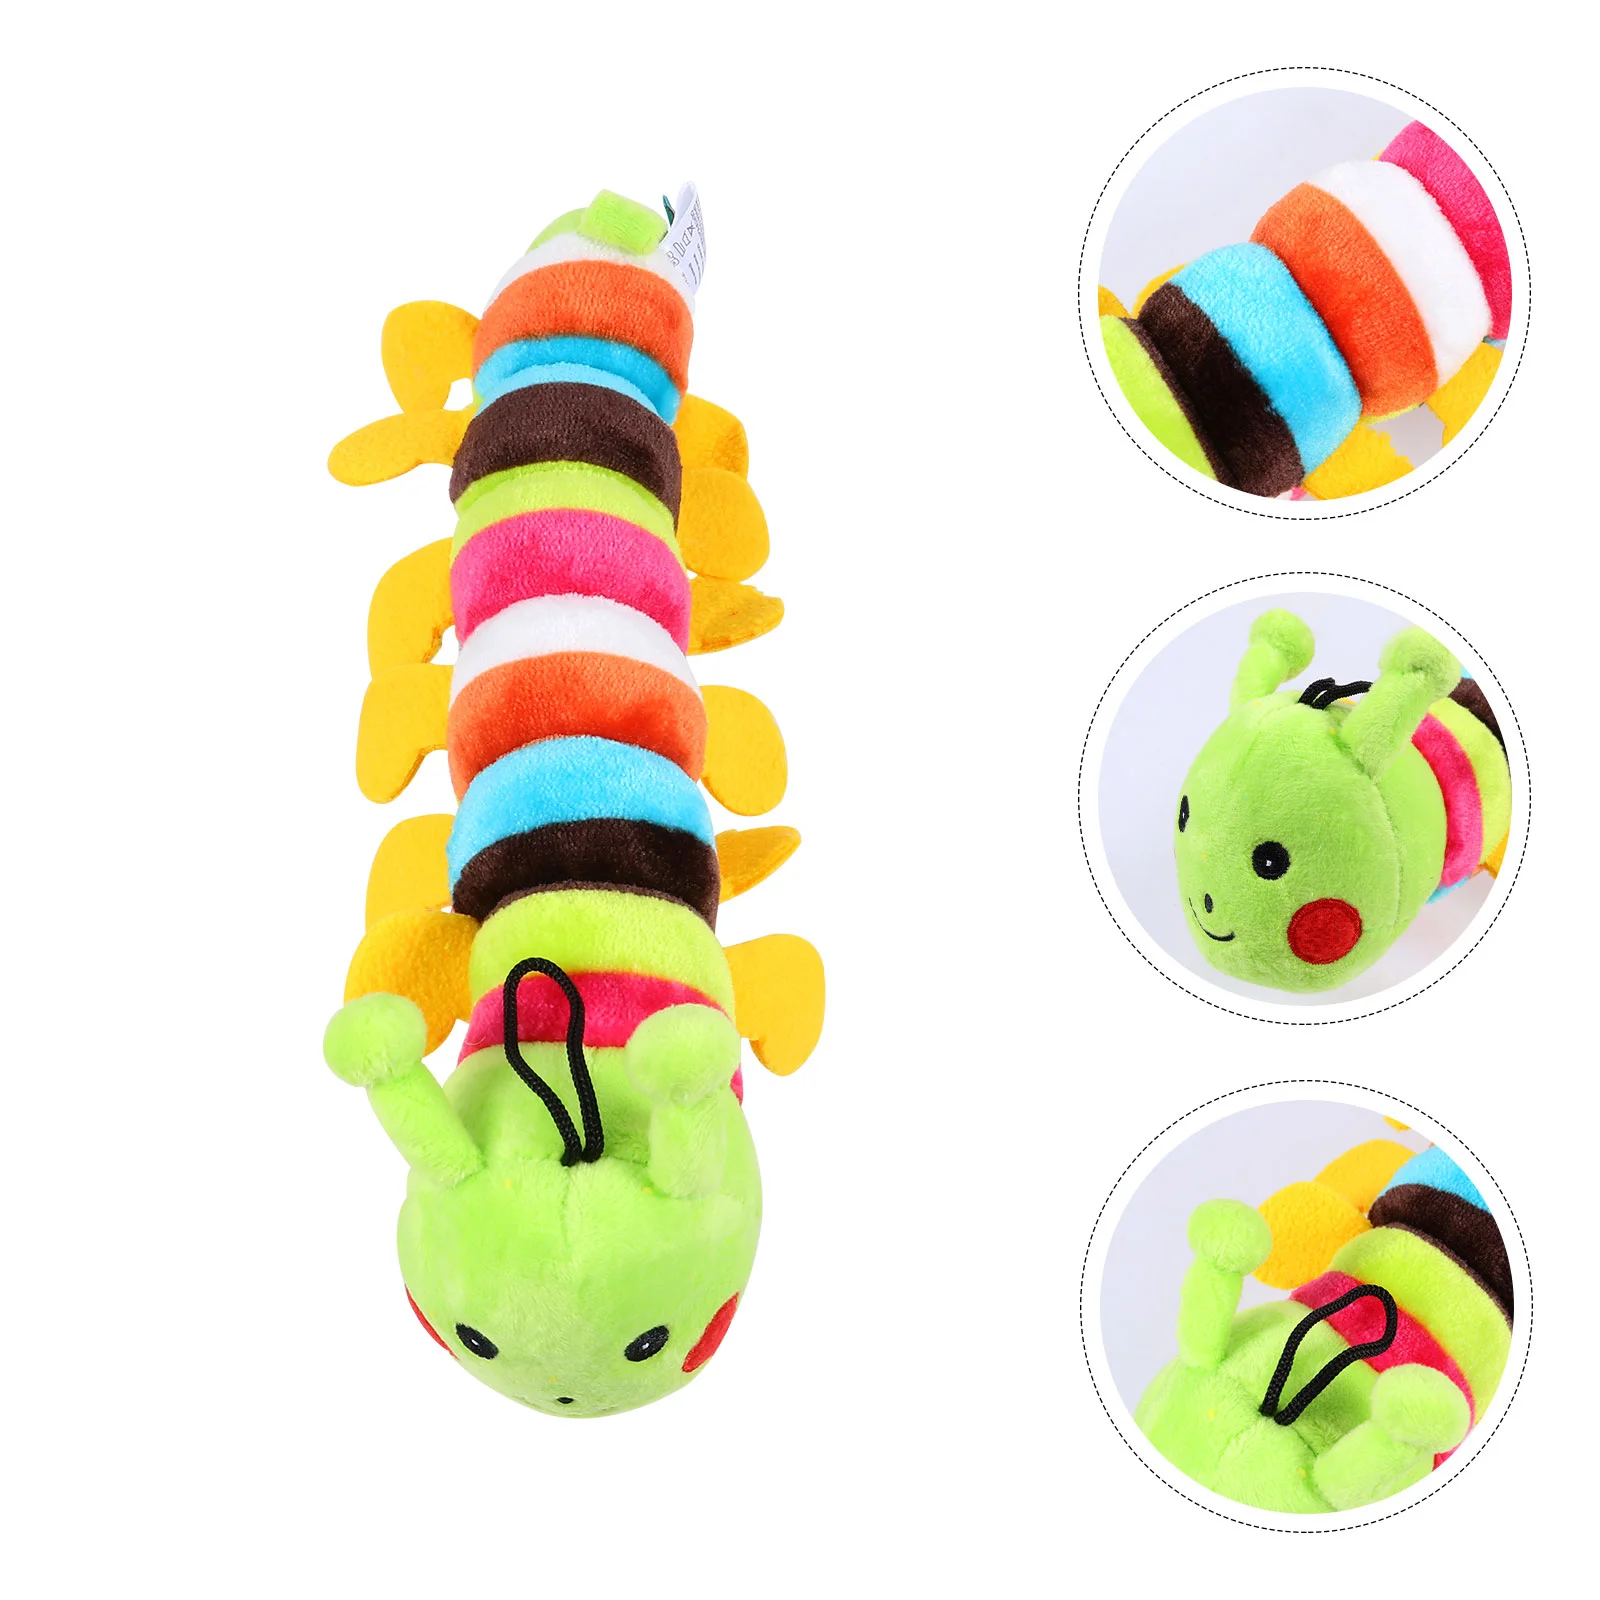 

Toy Toys Dog Chew Puppy Pet Teething Squeaky Plush Caterpillar Molar Tough Catch Plaything Playing Soothingtraining Dogs Teeth